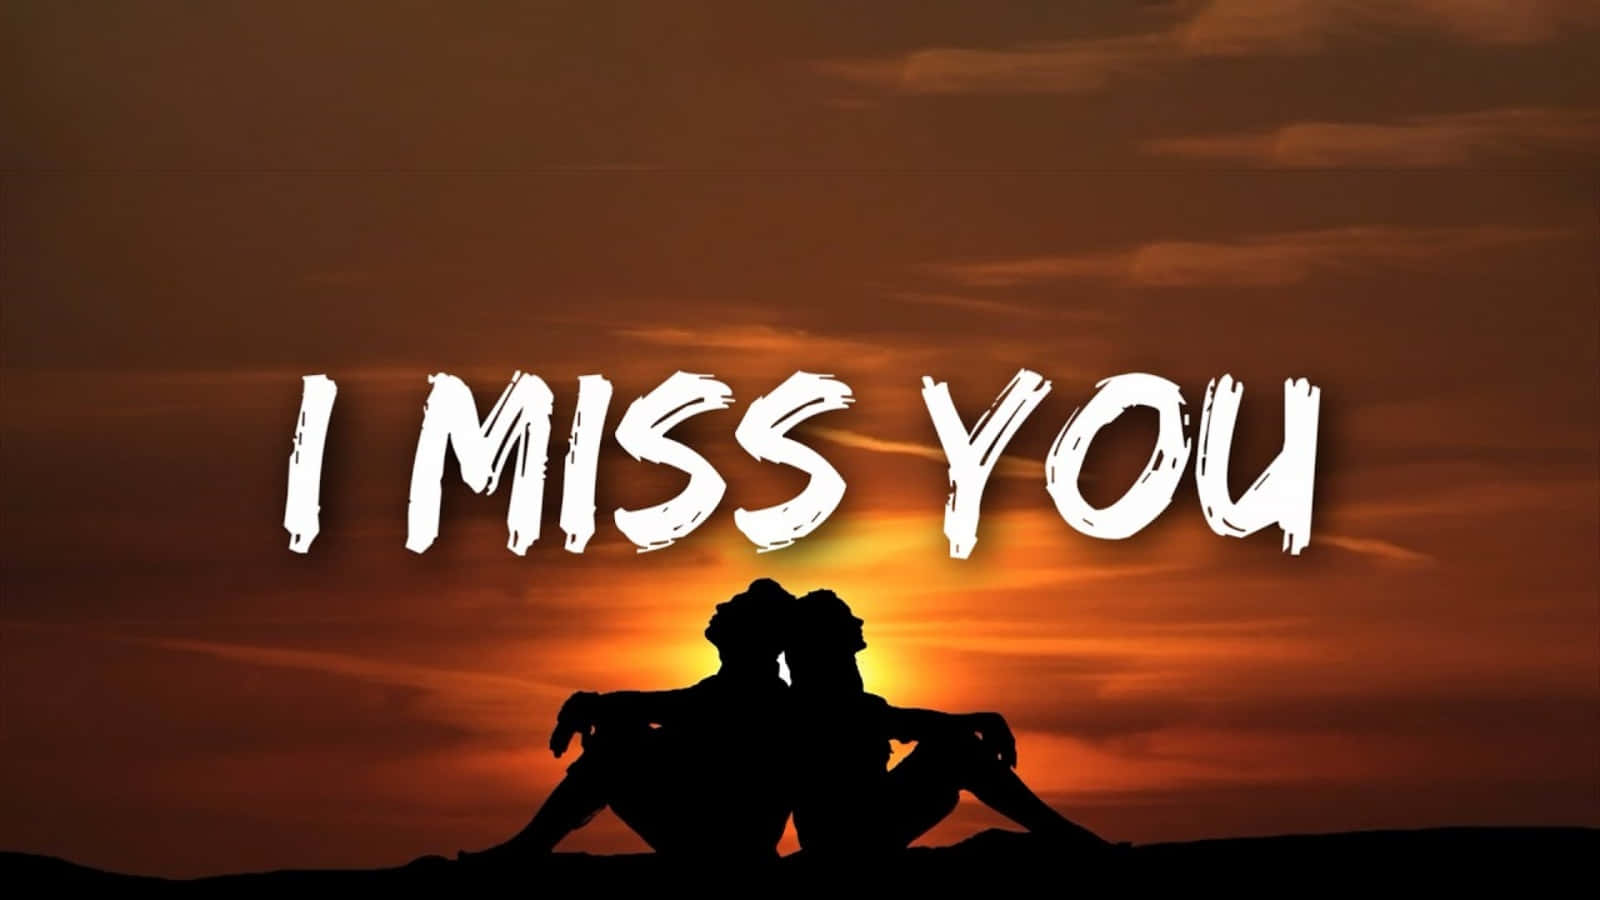 Download Missing those special people in your life | Wallpapers.com